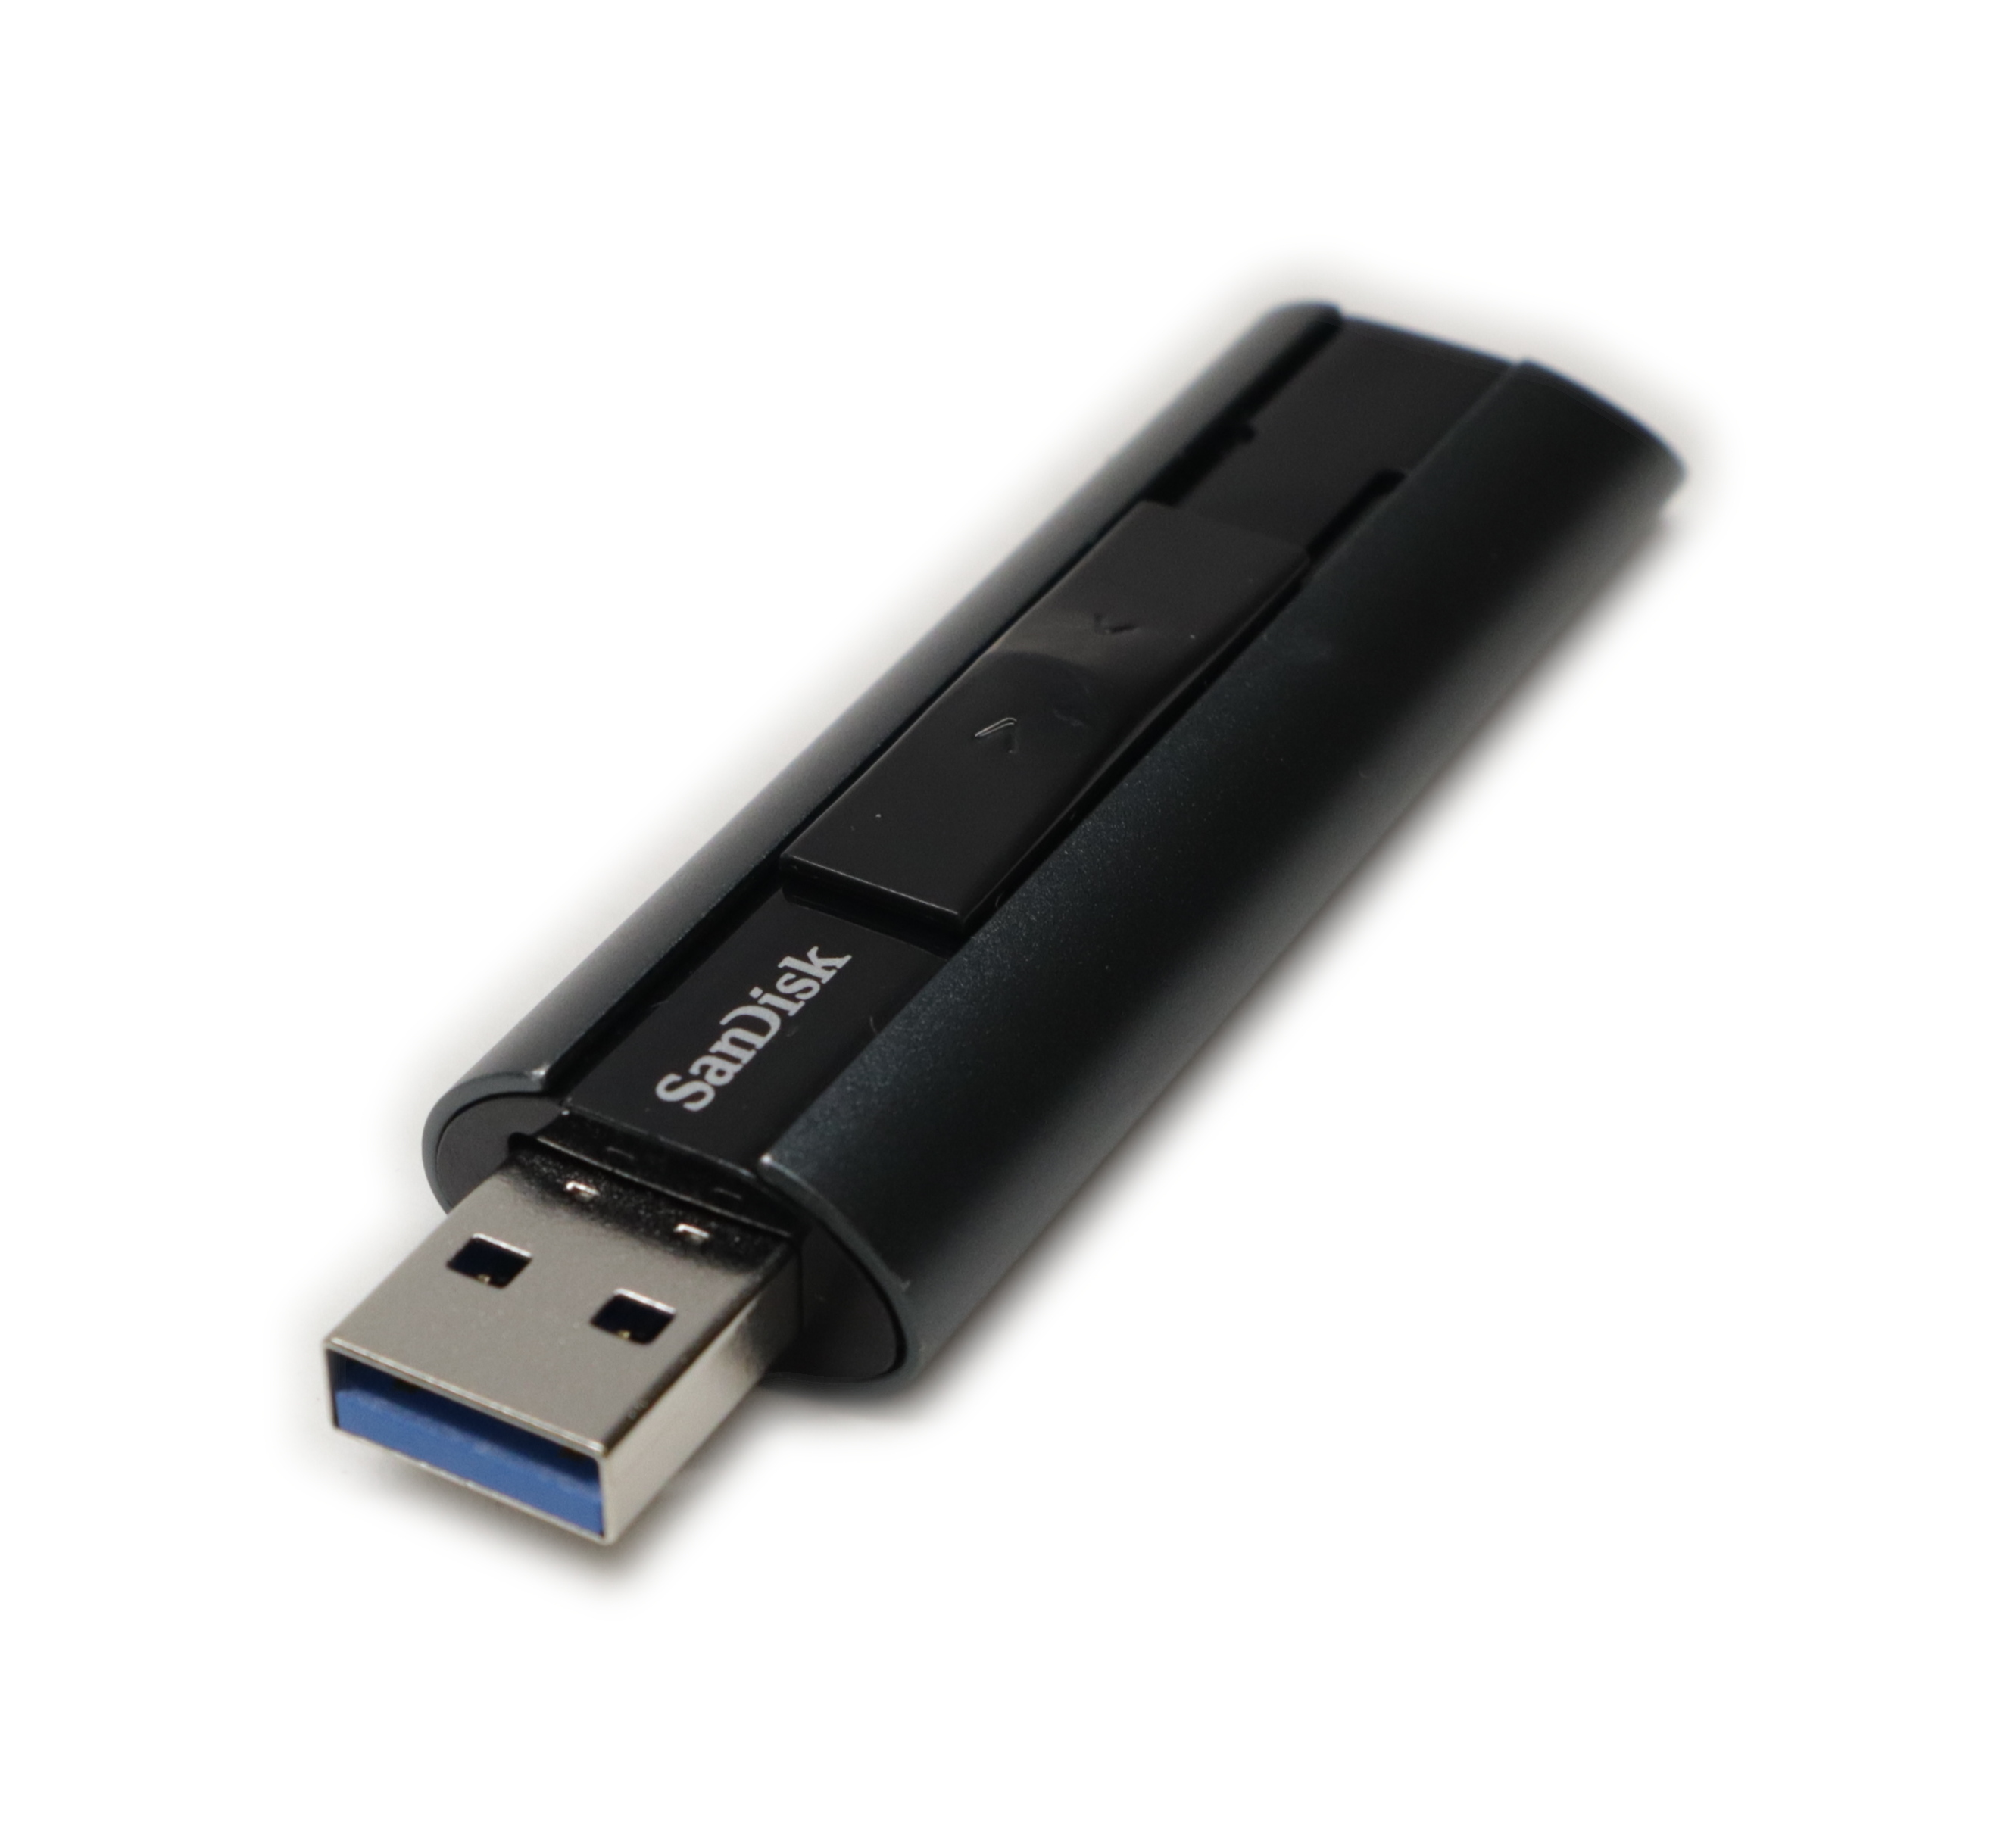 Sandisk 256gb Extreme Pro Am Usb 3.1 Flash Drive SDCZ880-256G-A46 - Click Image to Close